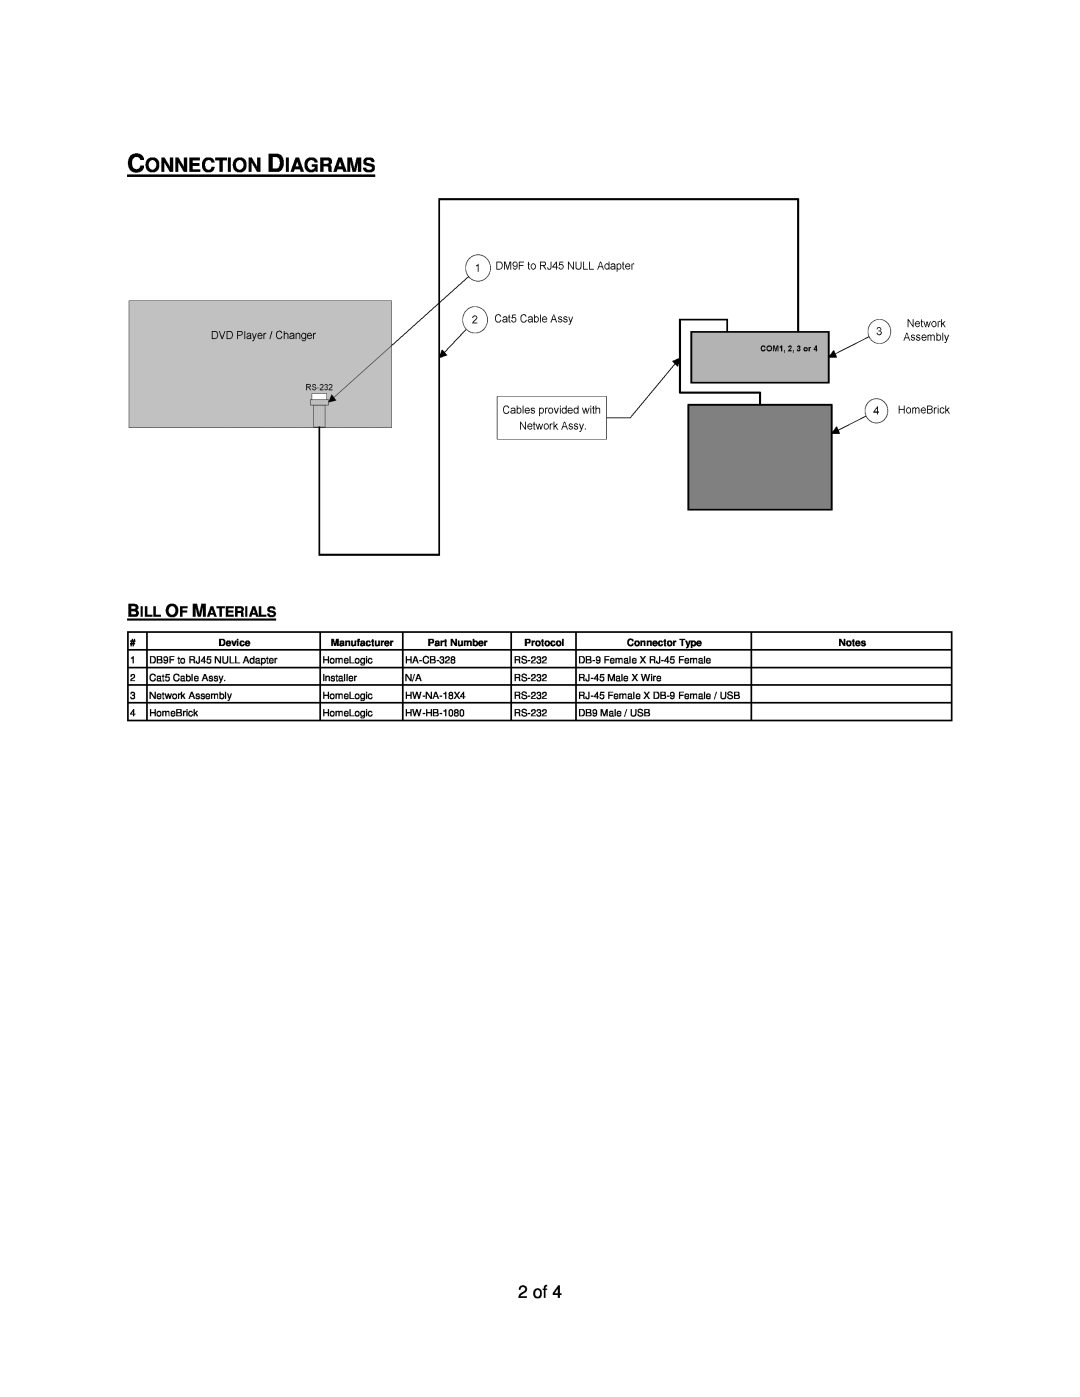 Sony Ericsson DVP-CX777ES manual Connection Diagrams, Bill Of Materials, Device, Manufacturer, Part Number, Protocol 